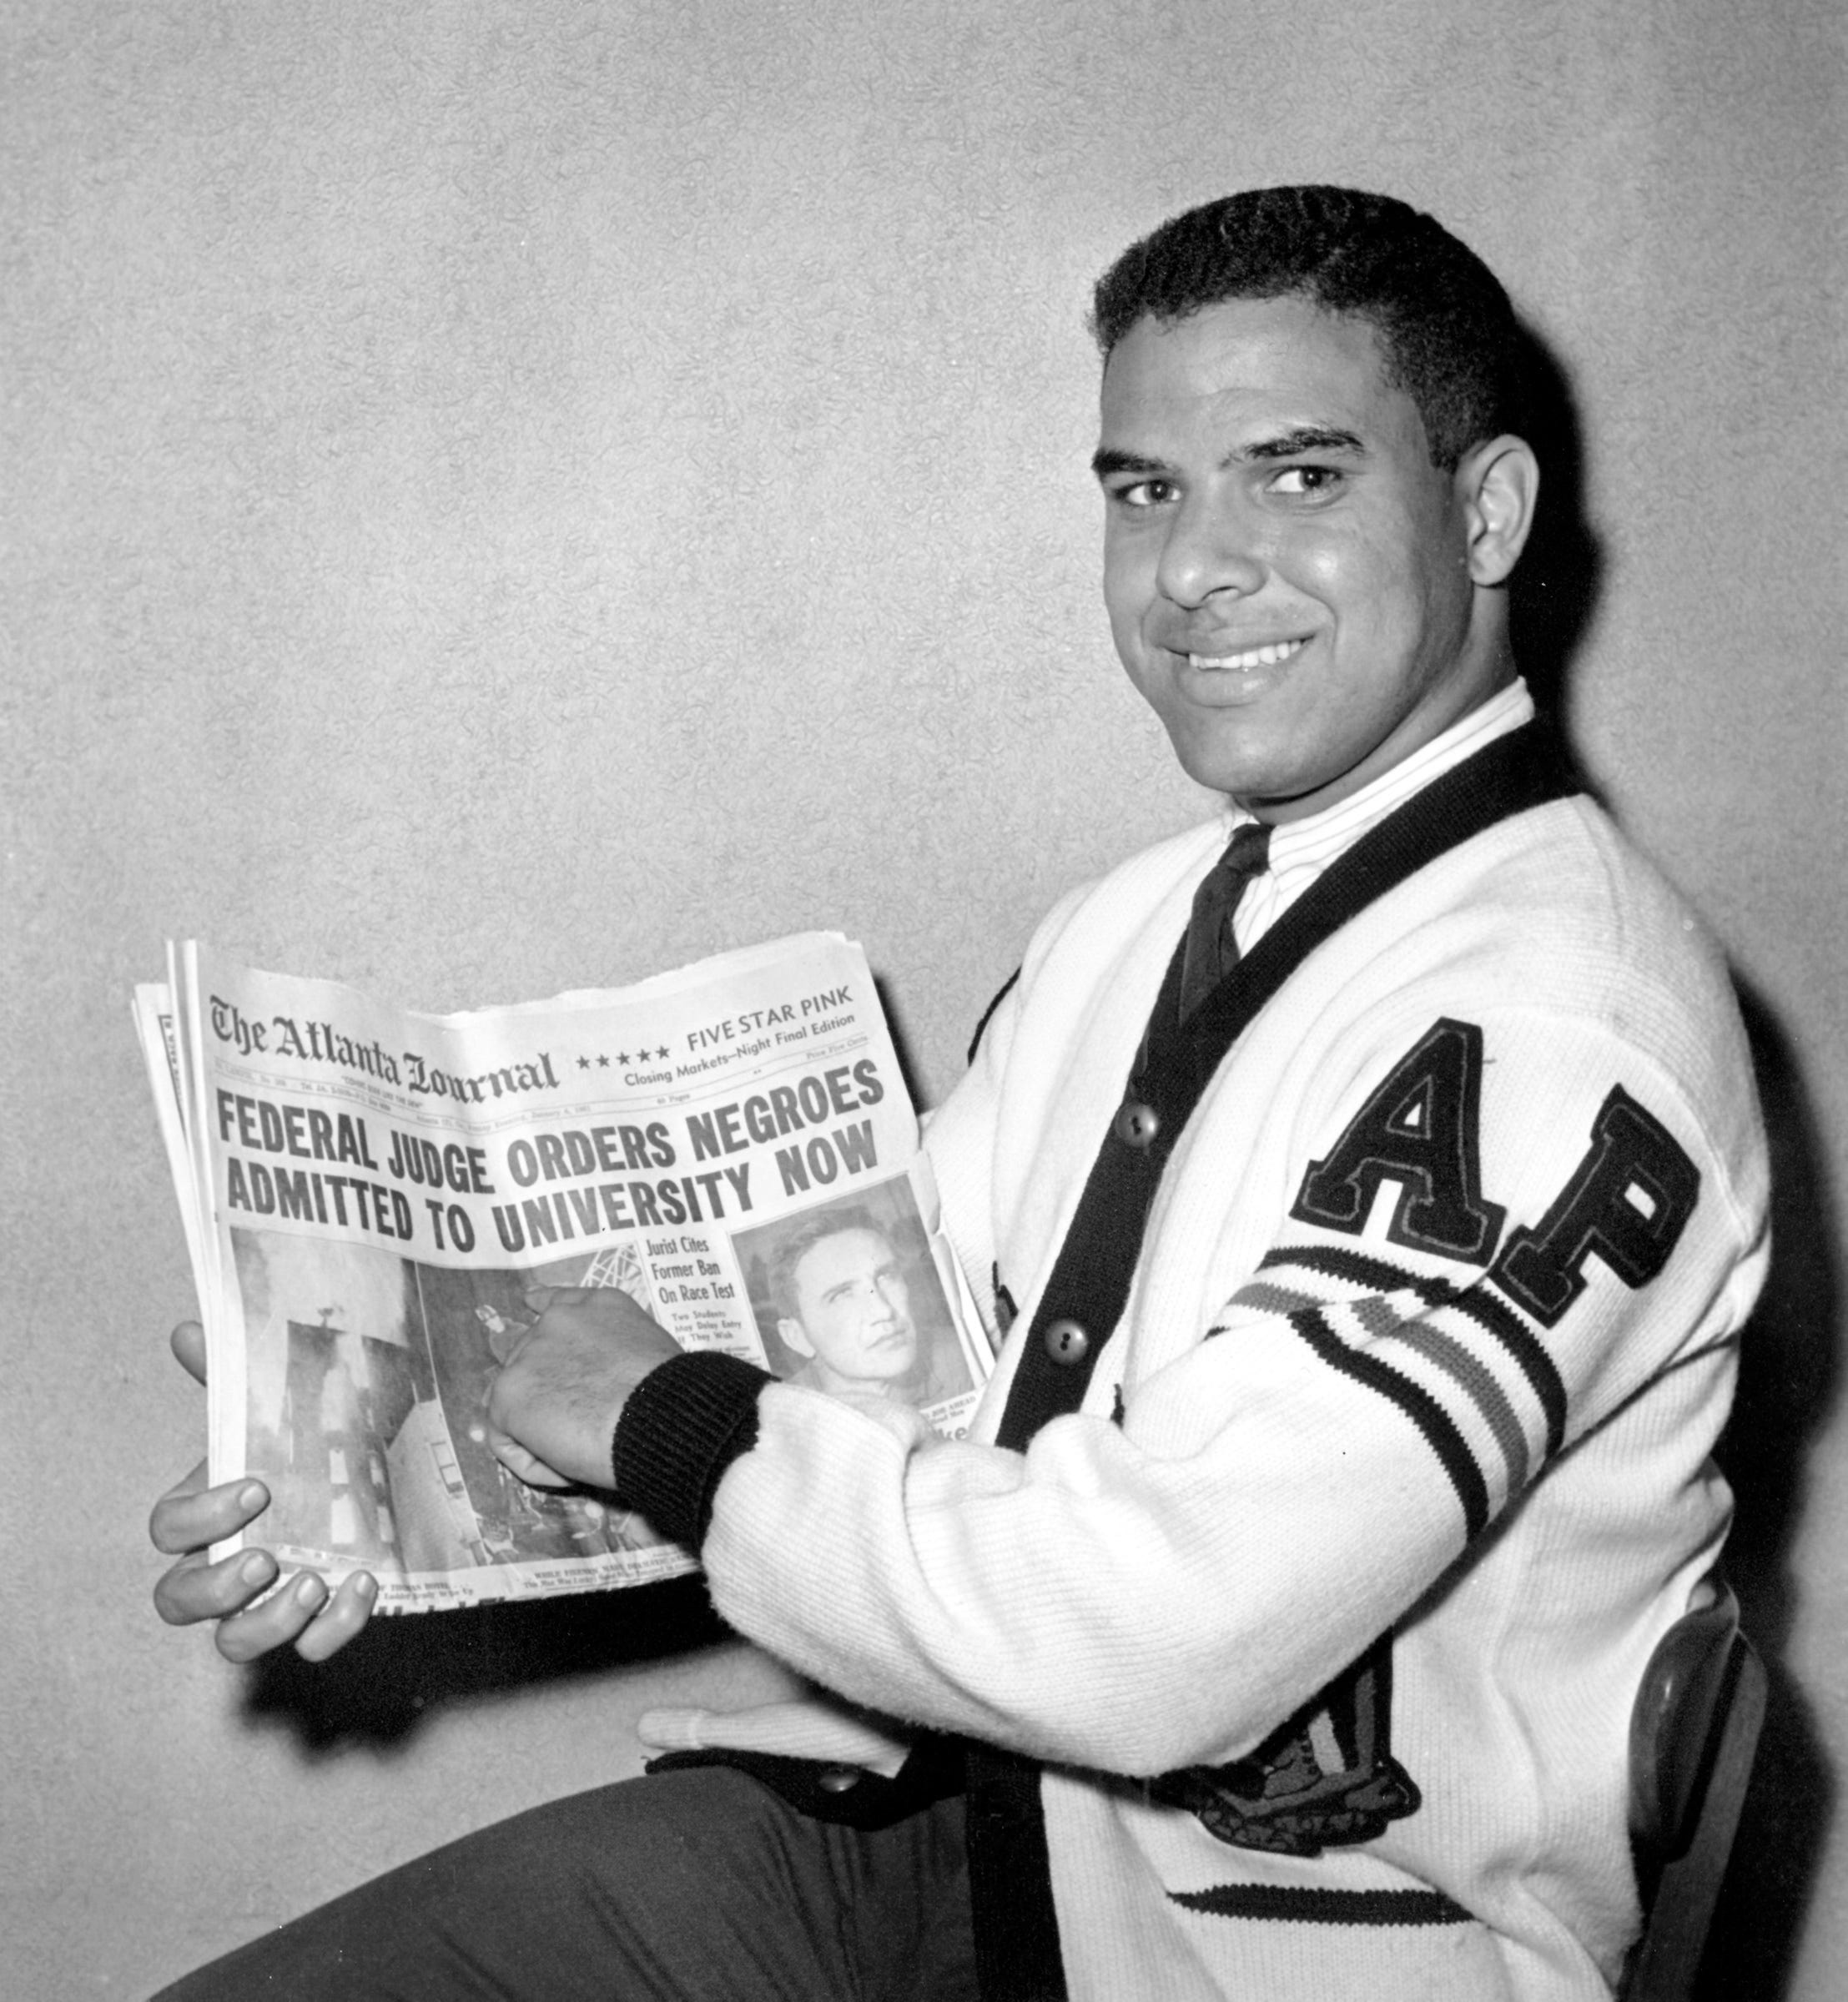 Hamilton E. Holmes, 19, displays The Atlanta Journal's headlines on Jan. 6, 1961, after he and Charlayne Hunter, 18, were ordered admitted immediately to the University of Georgia, an all-white college. U.S. District Judge W.A. Bootle ruled that they had been denied admission because of race. Holmes was a pre-med student at Morehouse College in Atlanta. Hunter was studying journalism at Wayne State University in Detroit.